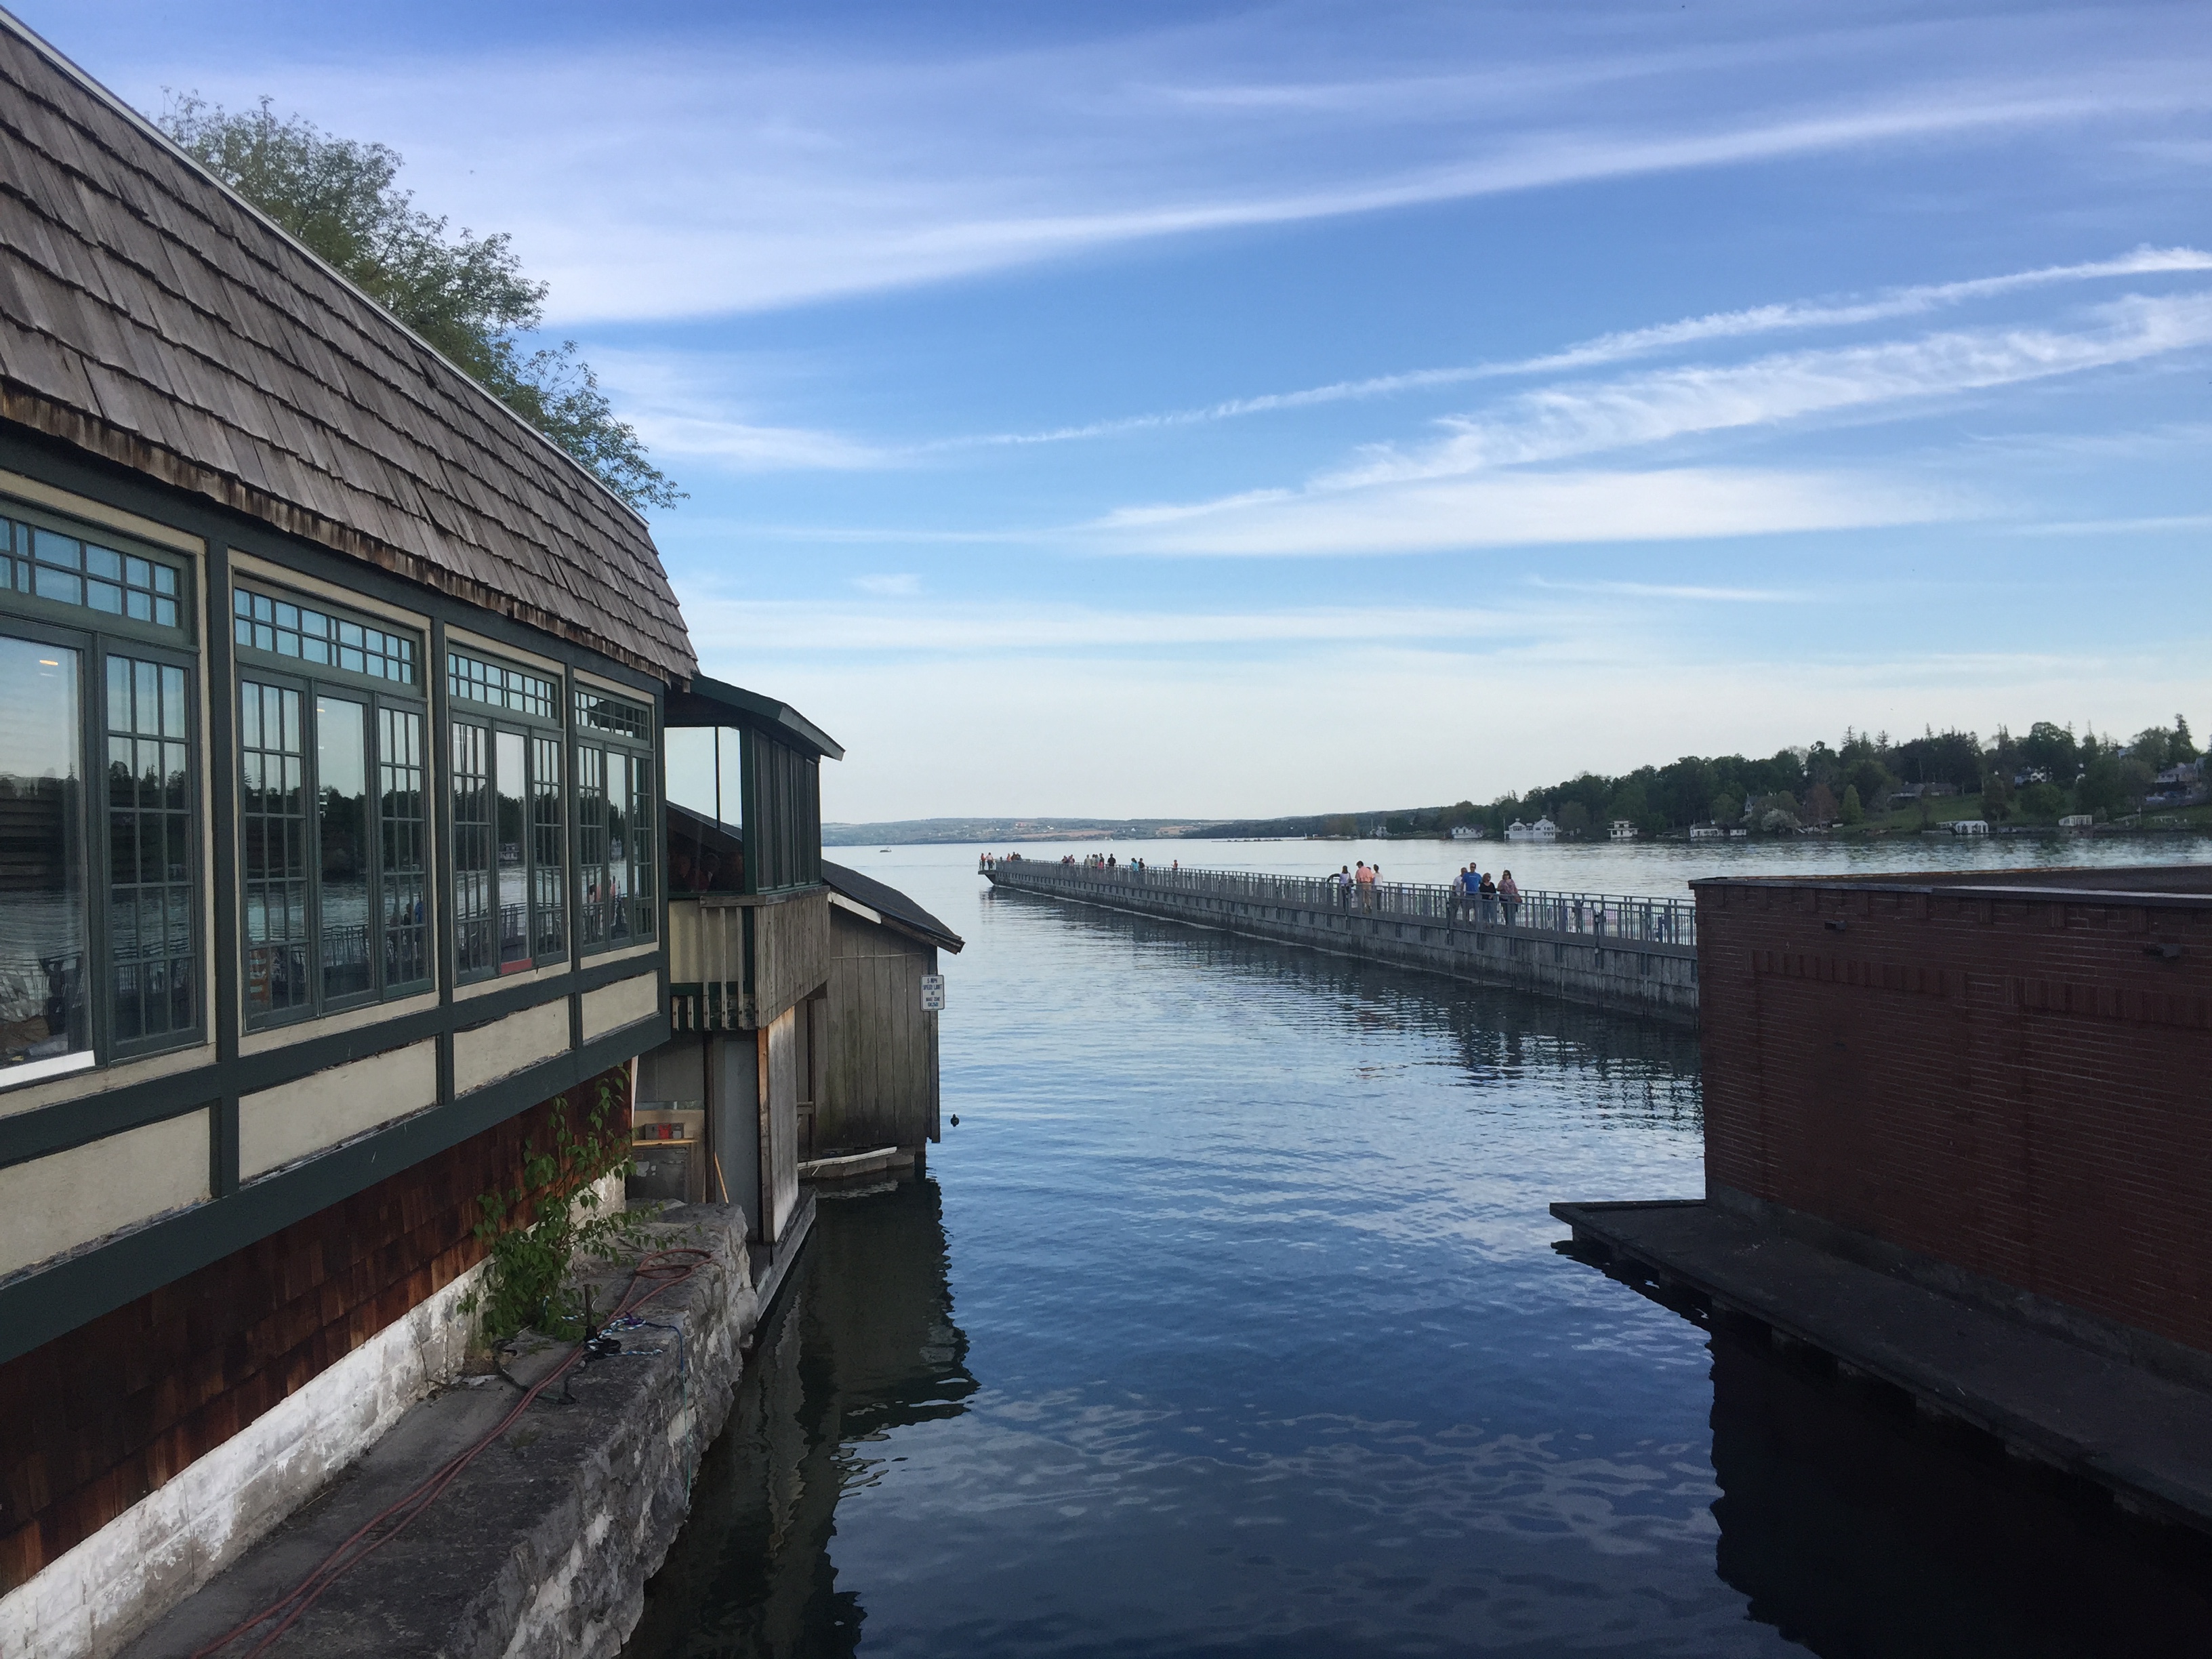 If you think that New York State consists of just Manhattan and Westchester, you're missing out on a lot of beautiful places! Check out Skaneateles for your next weekend getaway.